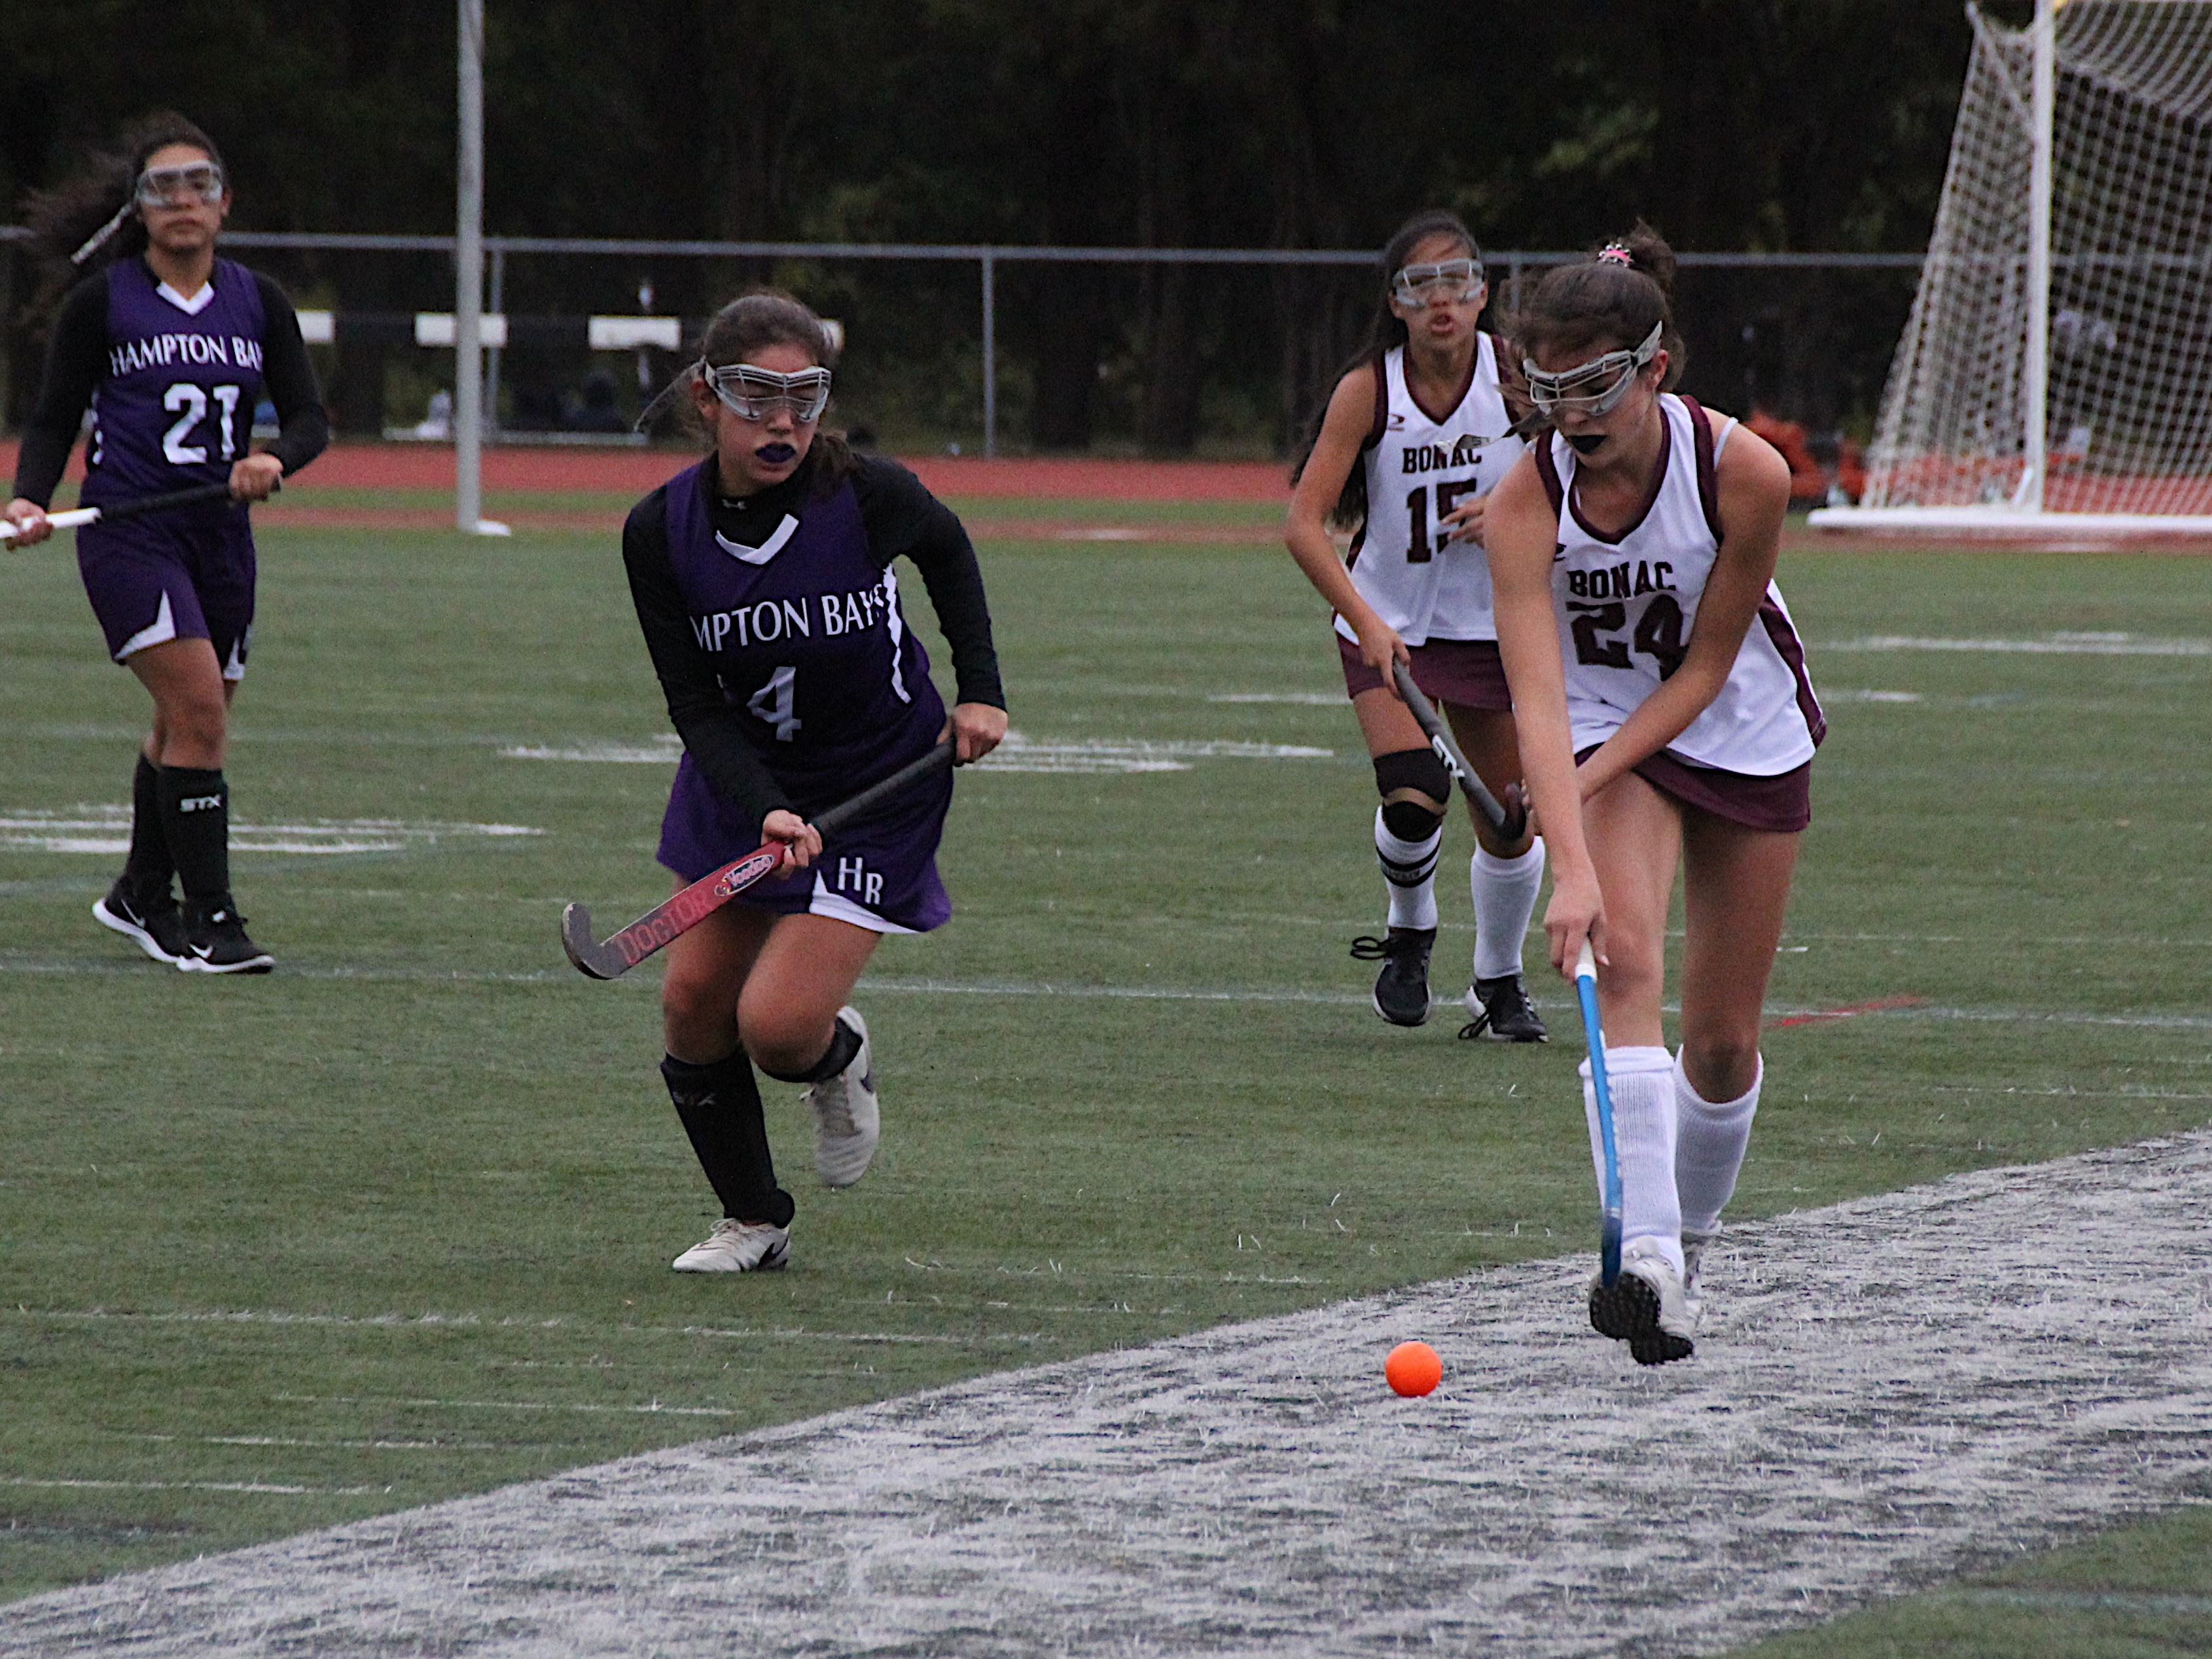 East Hampton eighth-grader Melina Sarlo races the ball downfield with Hampton Bays sophomore Angie Chinchilima chasing after her.